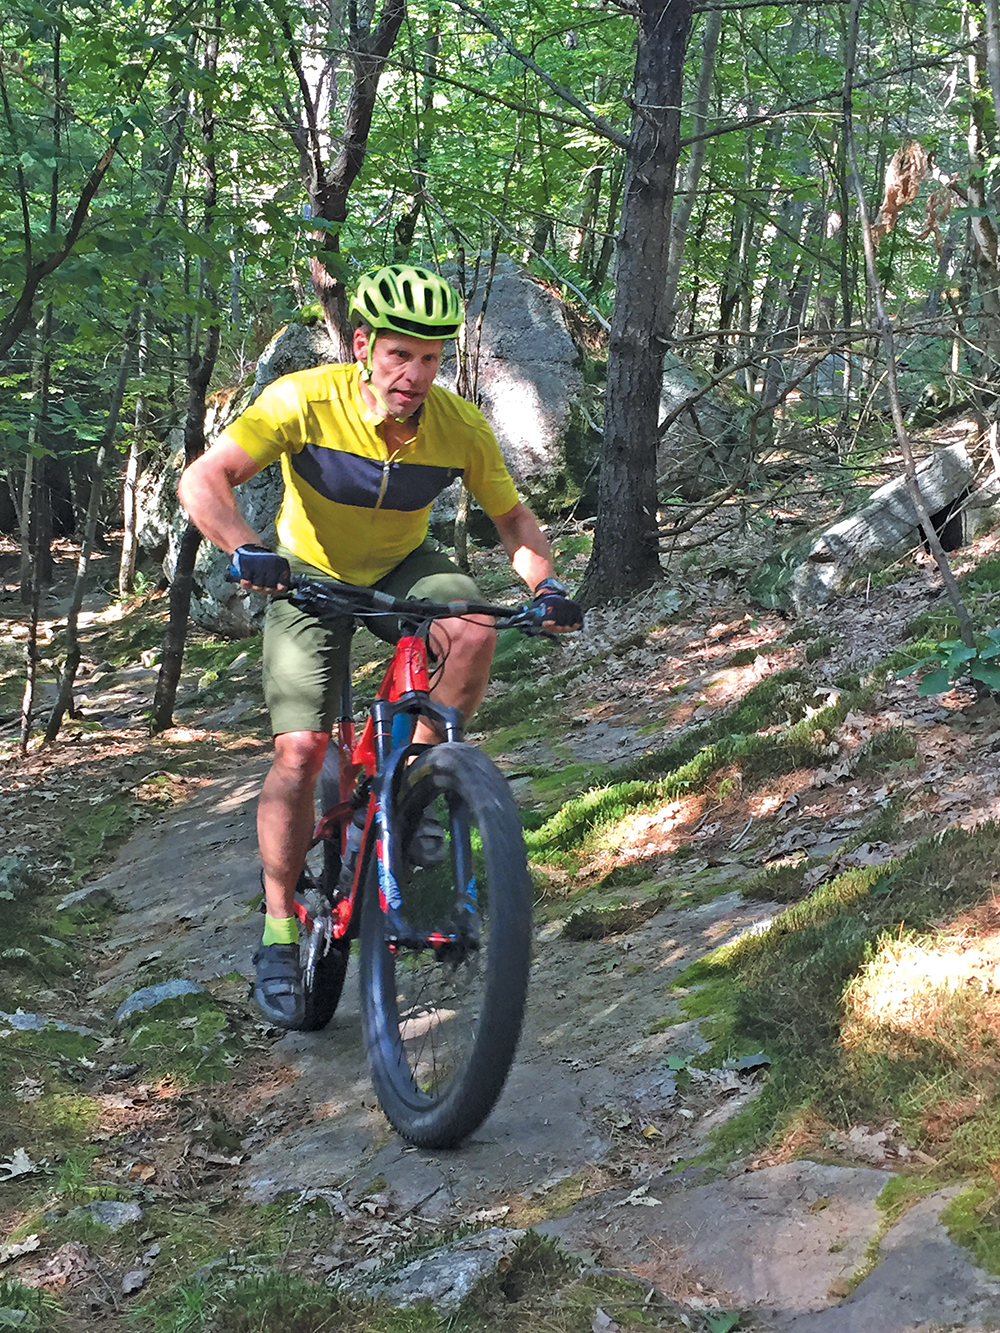 Steve Varga is one of the pioneers who built the original trails at Three Stage.